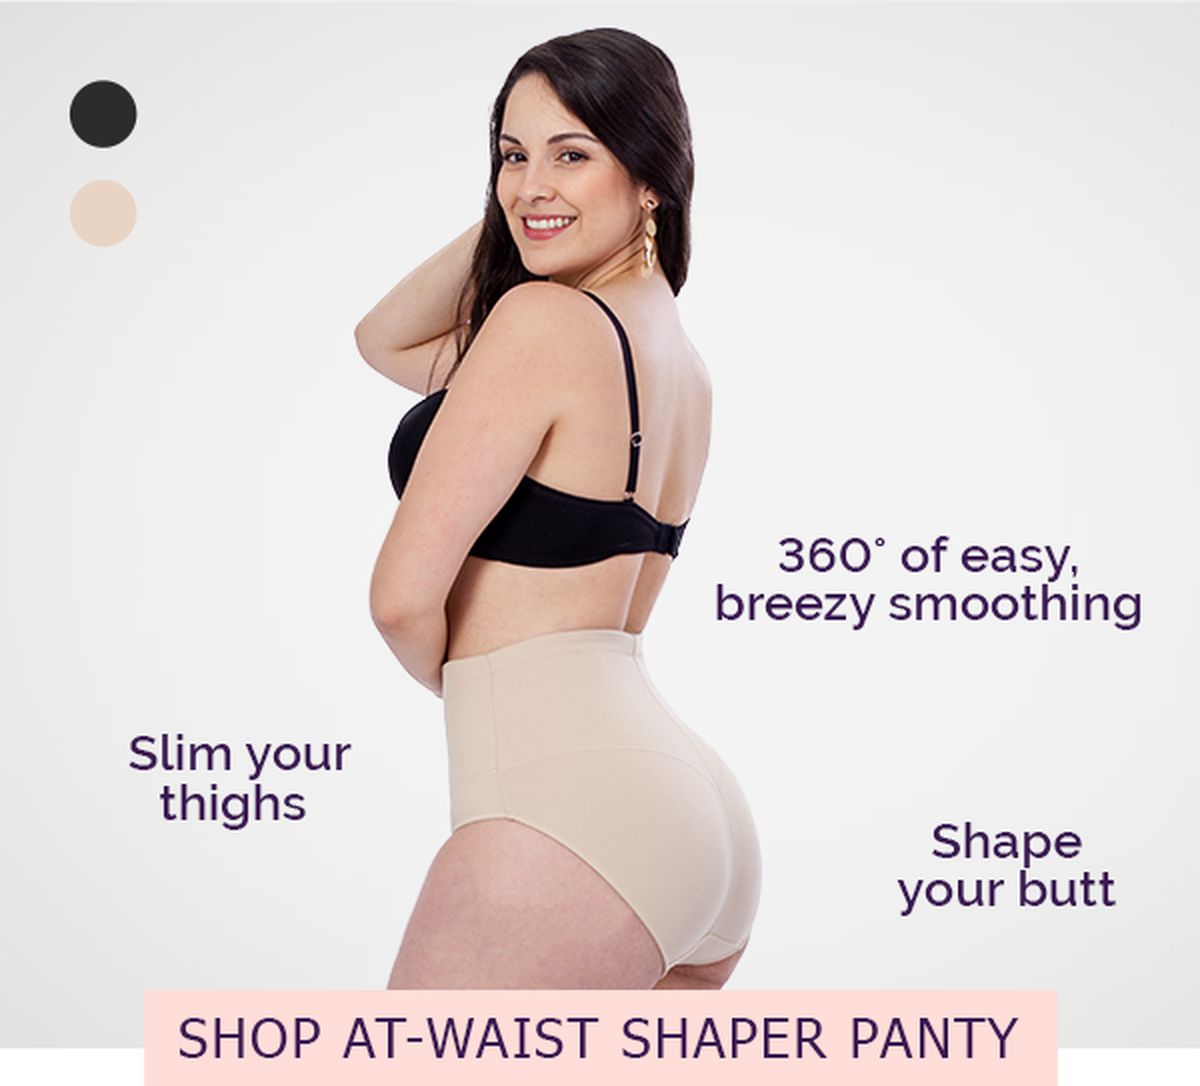 Shapermint - The easiest way to shop shapewear online: ⚡️Back in Stock⚡️, Empetua BOGO + Free Gift